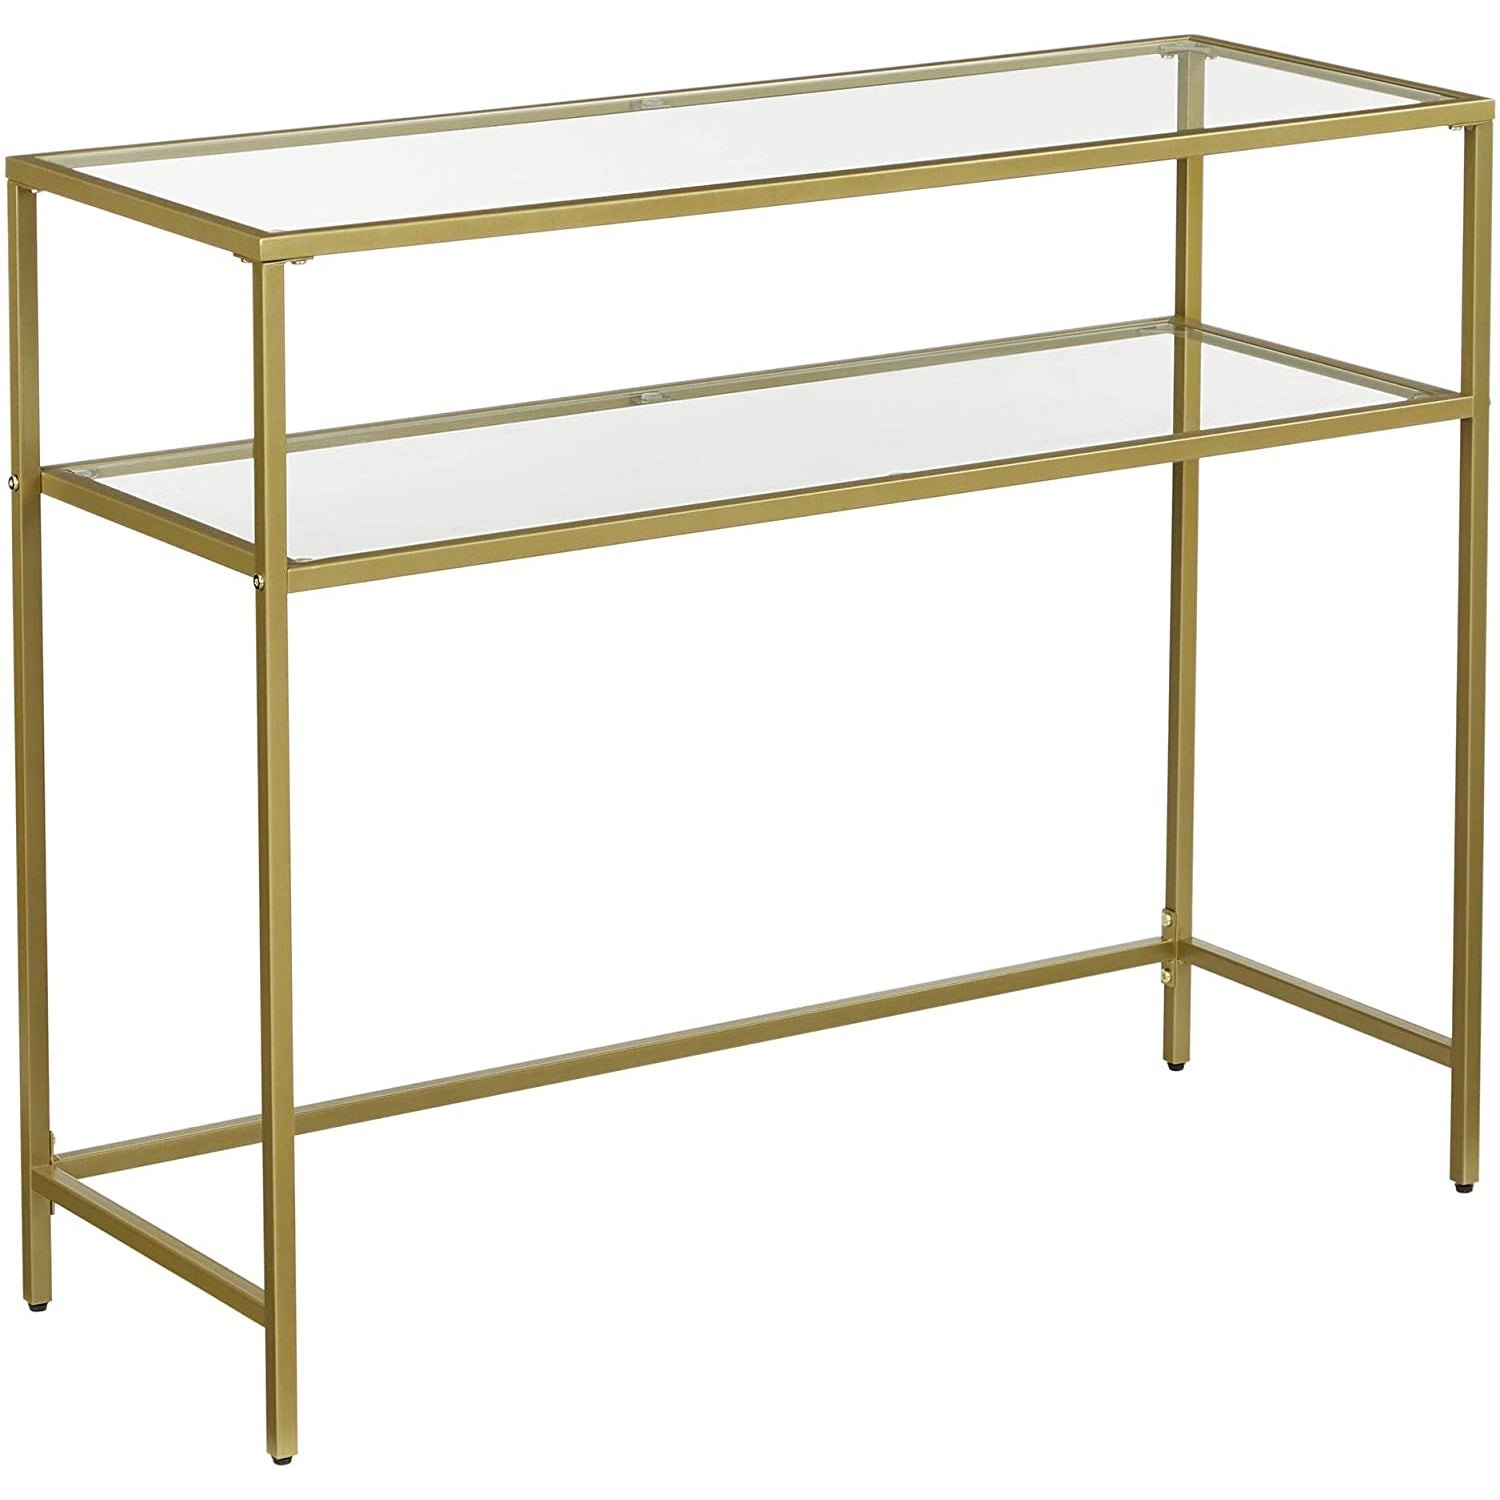 Nancy's Goldfield Console Table - Side Table - 2 Levels - Tempered Glass - Metal Frame - Adjustable Legs - Gold - 35 x 100 x 80 cm